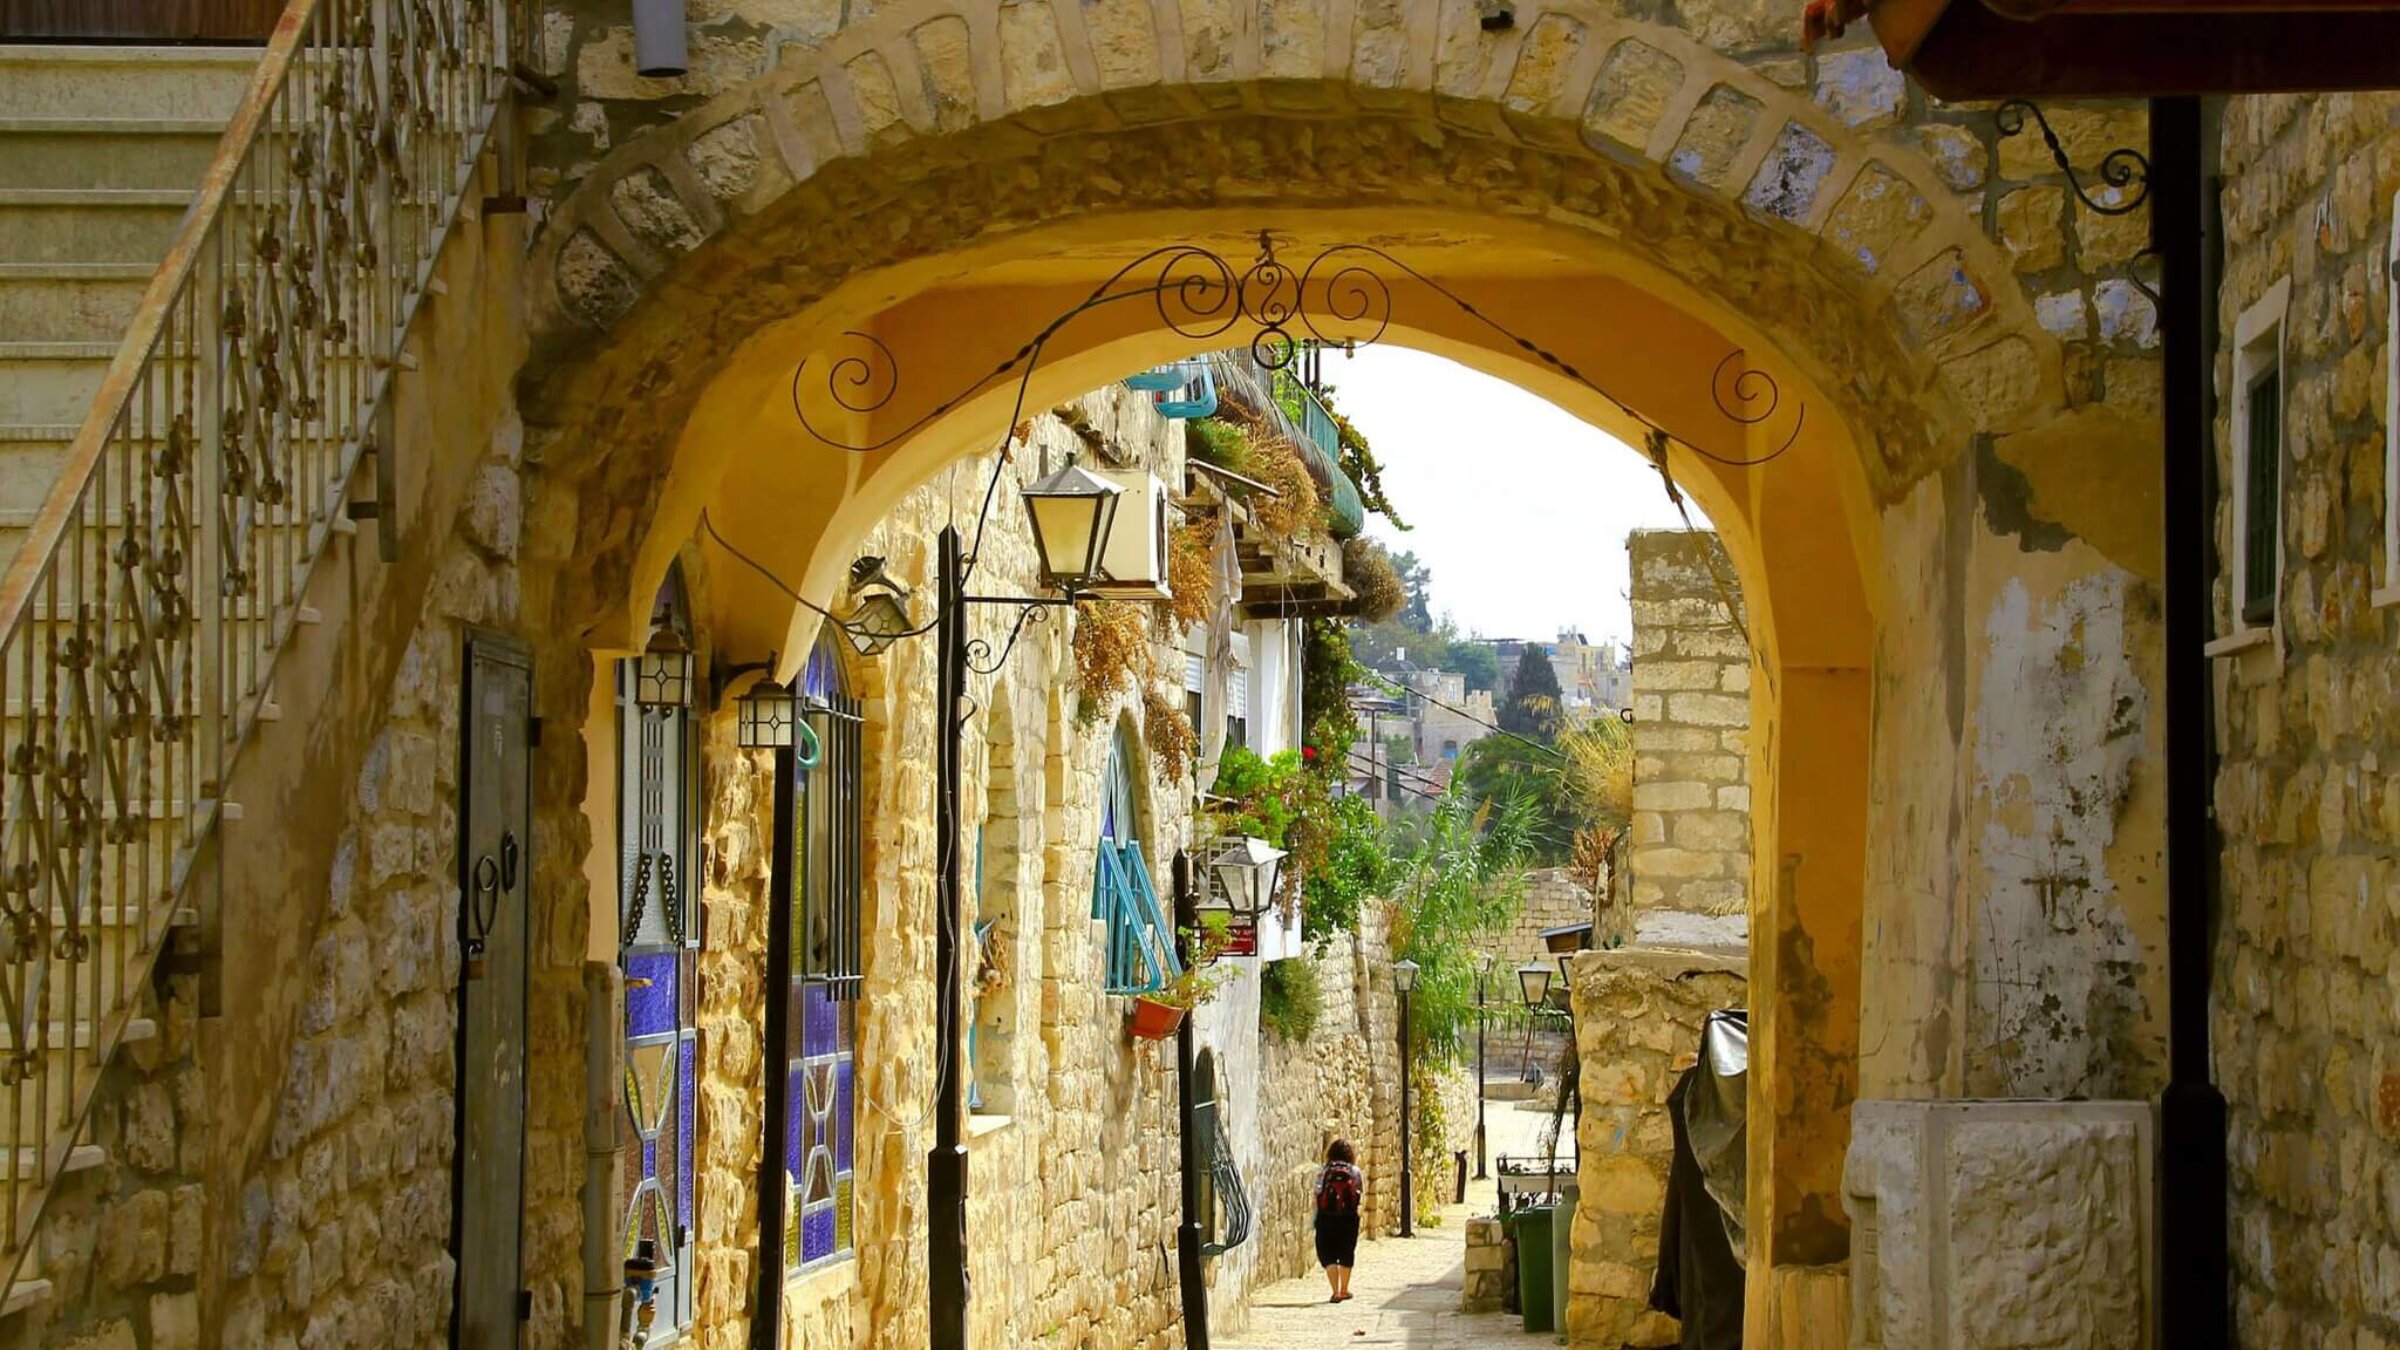 The old city in Tzfat